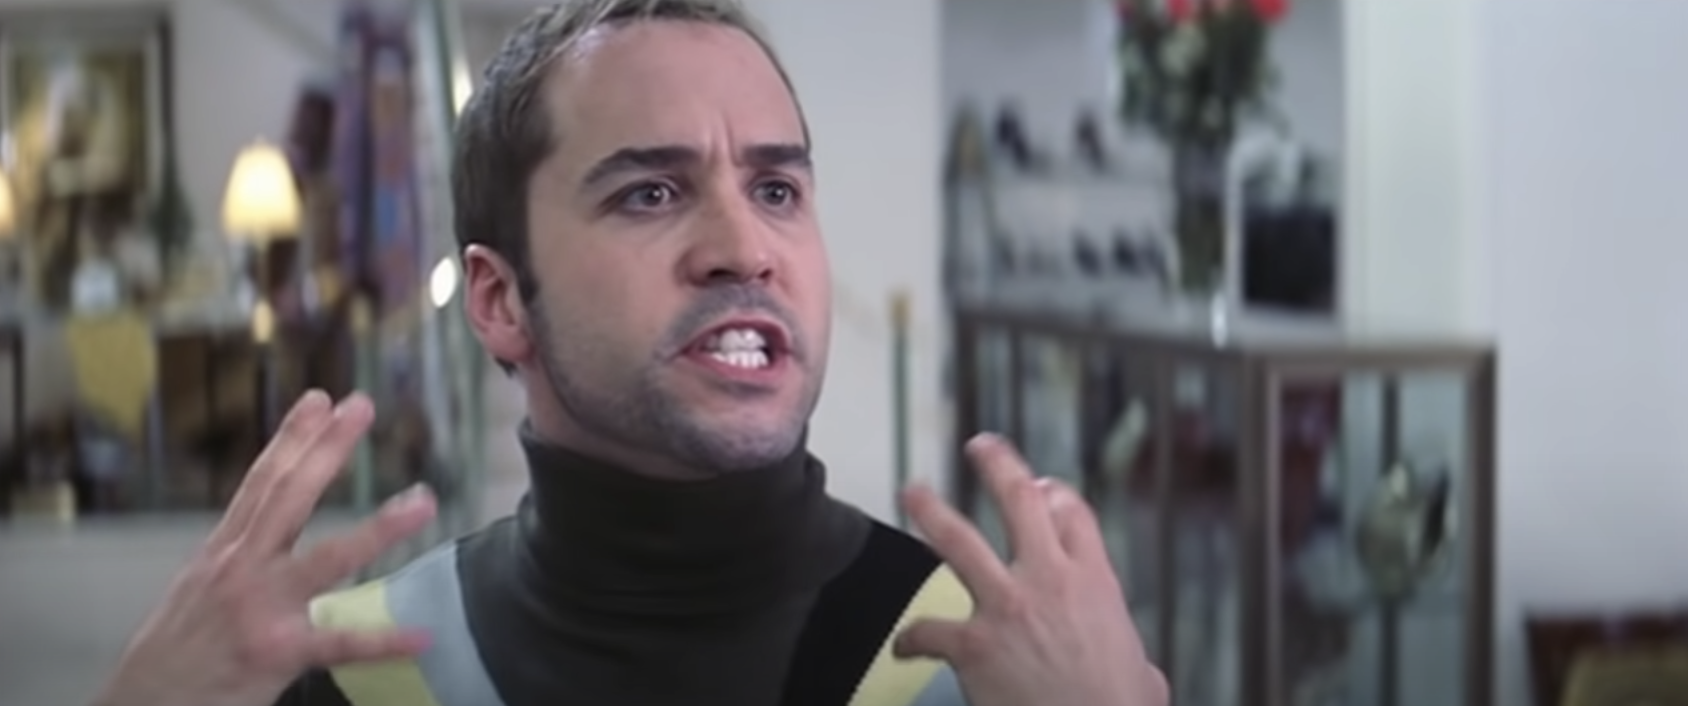 Jeremy Piven in a turtle neck